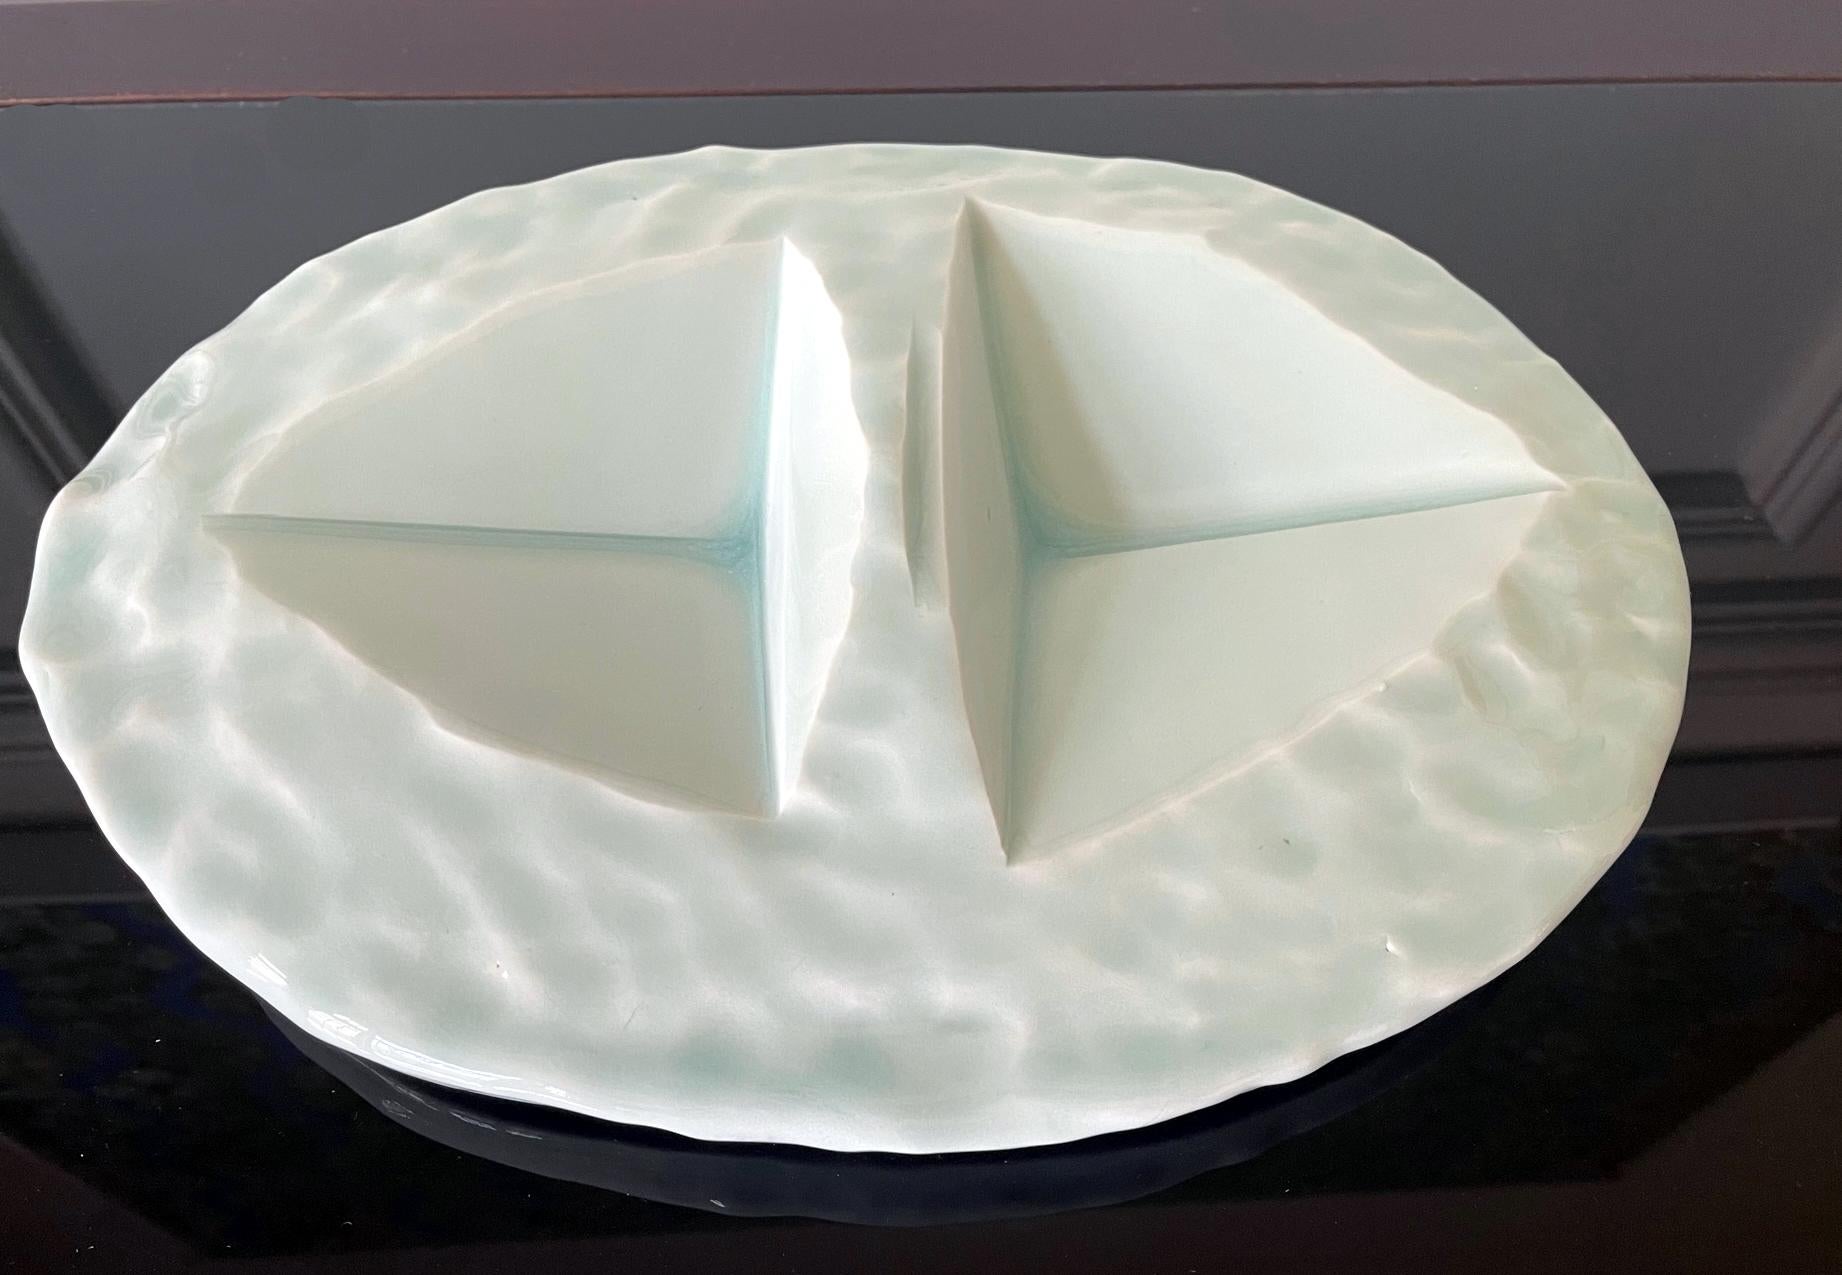 A richly glazed ceramic sculptural slab in the shape of a centerpiece plate by Japanese ceramic artist Yoshikawa Masamichi (1946-). The highly abstract piece was hand built with intentional irregularity and covered with a thick bluish-green